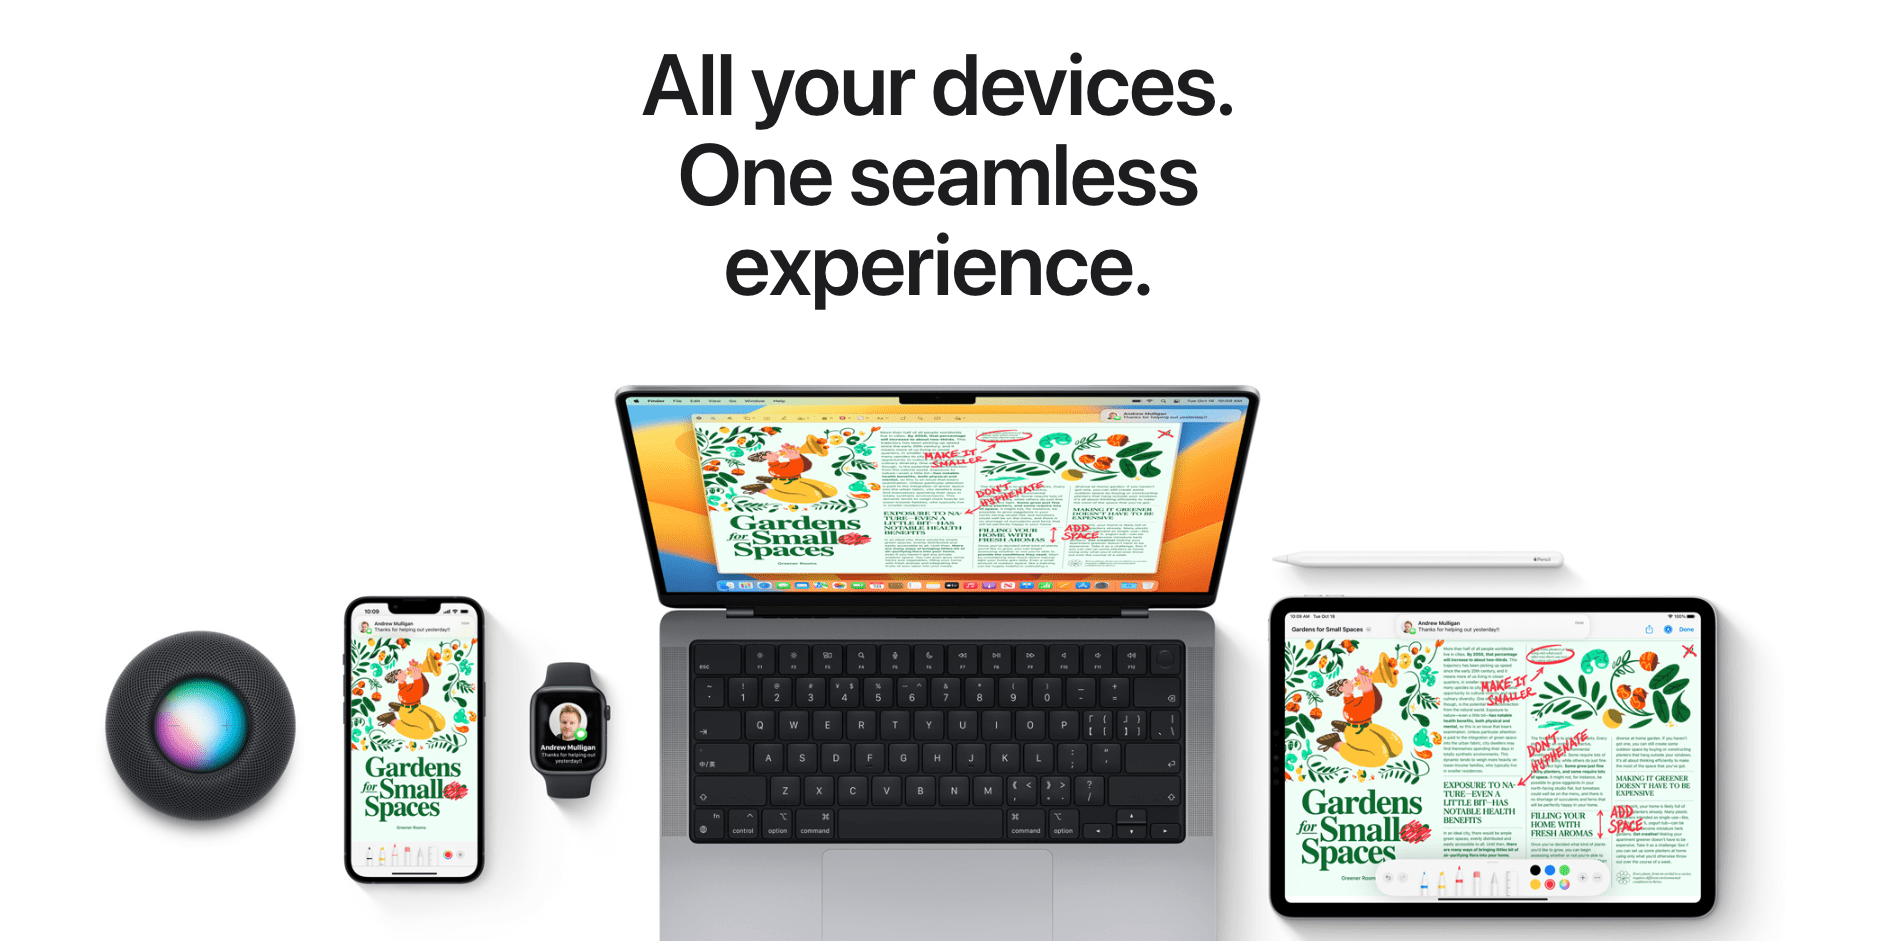 Apple's seamless experience across all devices because of omnichannel marketing